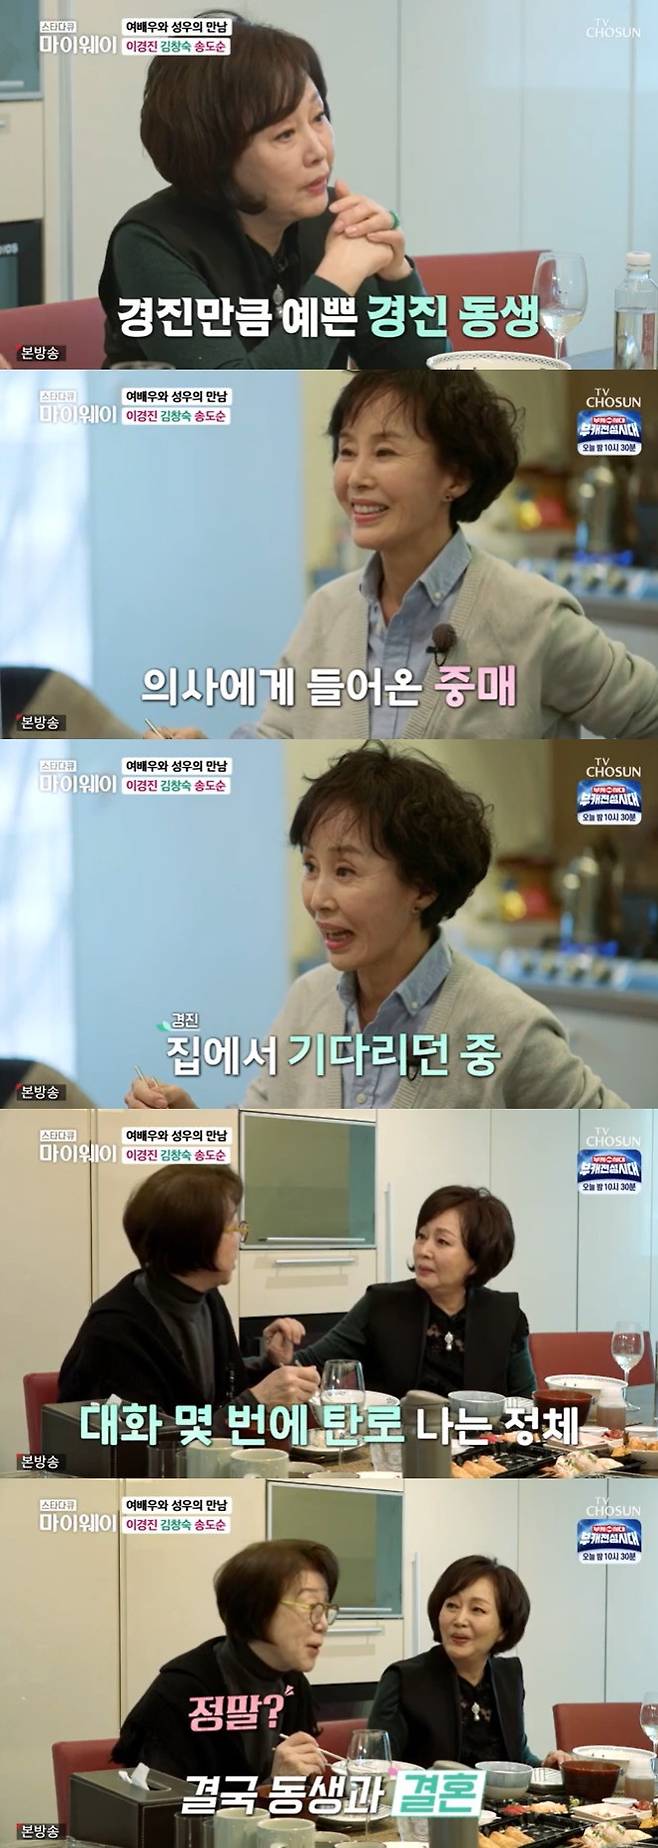 Actor Lee Kyung Jin revealed that the doctor who liked him became his sisters husband and wife.Actor Lee Kyung Jin appeared on the TV Chosun star documentary myway broadcast on February 20th.Lee Kyung Jin invited his best friend Actor Kim Chang-Sook and Sungwoo Song Do Soon to eat and talk.Kim Chang-Sook looked at the 67-year-old single Lee Kyung Jin and said, I tried to introduce it before, but I did not have time to watch the script.Lee Kyung Jin said, If you do not have a mind, you should not look at the line. There is no need for a man to be there.You can stay or not. Its nice to eat outside and play golf together. You can talk to your sisters. Kim Chang-Sook and Song Do-soon also shook their heads, saying, What are you married to? Do not do it. The production team laughed, saying, Do you two tell me not to do it?Kim Chang-Sook said: Ive heard that story before.Lee Kyung Jins sister is also pretty, and the doctor who asked Lee Kyung Jin to match up with her came home and waited for her to talk to her sister and eventually married her sister. Lee Kyung Jin explained the situation at the time, I was a doctor living next door, but I was a fan and kept chasing me for coffee.A drama-like story about Lee Kyung Jin, who was busy watching the script, who could not get the man who came home, and the sister had a conversation and the two of them had a couples kite.Kim Chang-Sook, Song Do-soon admired it as a really amazing thing.